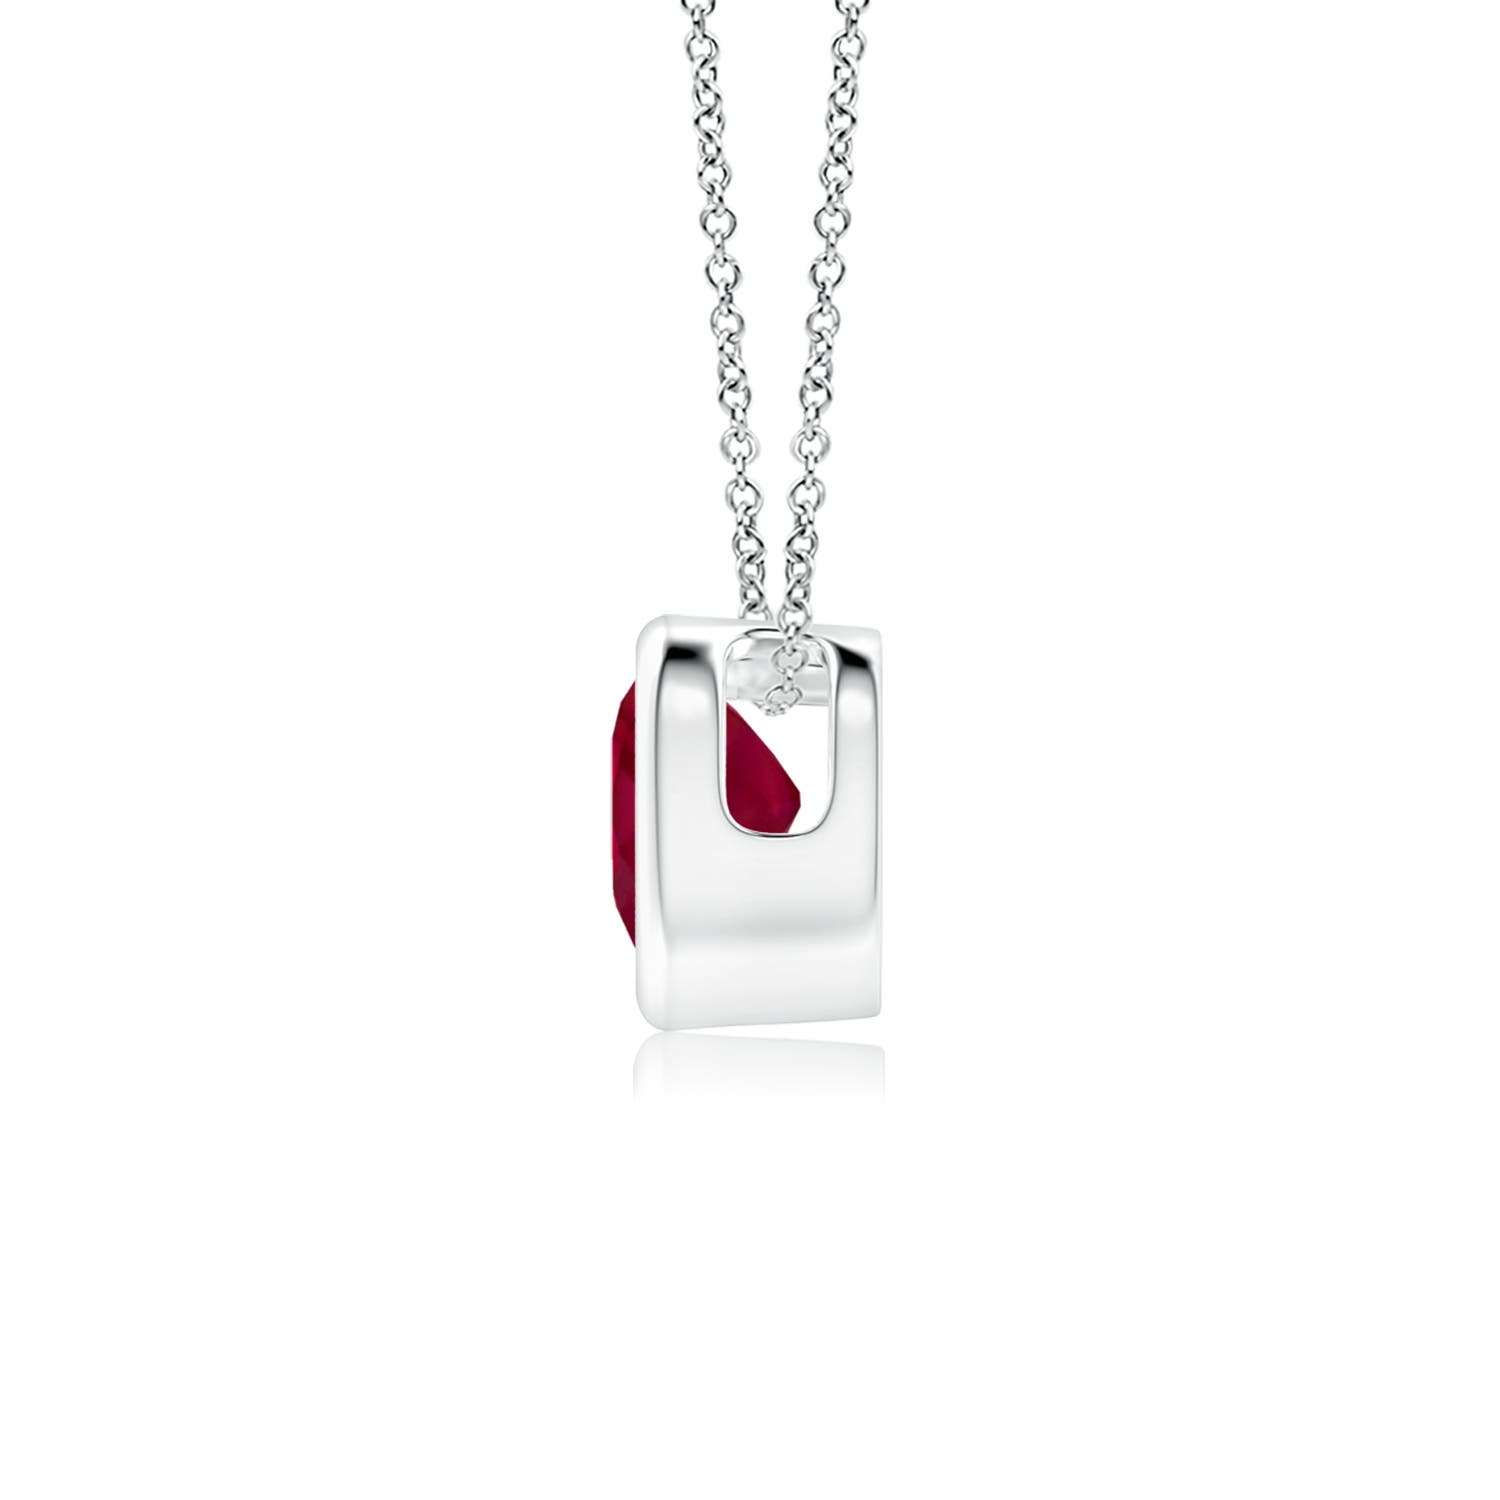 A - Ruby / 0.3 CT / 14 KT White Gold